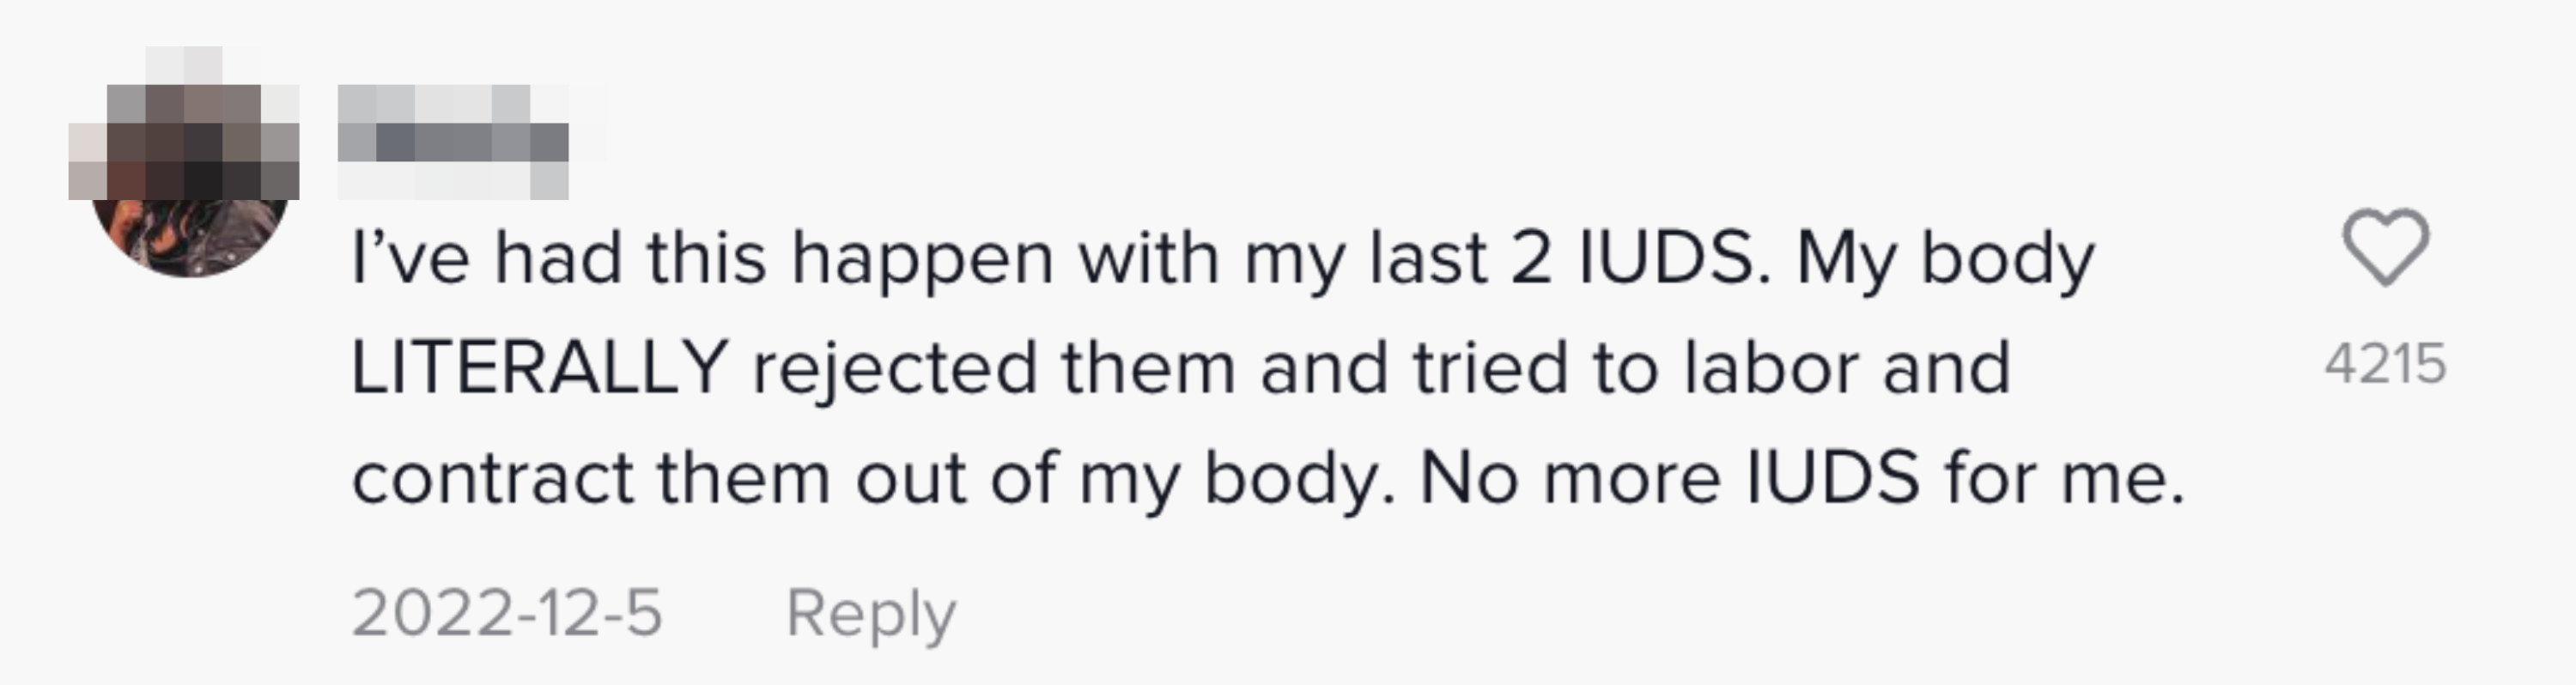 Another person said &quot;I&#x27;ve had this happen with my last 2 IUDS. My body LITERALLY rejected them and tried to labor and contract them out of my body. No more IUDS for me&quot;